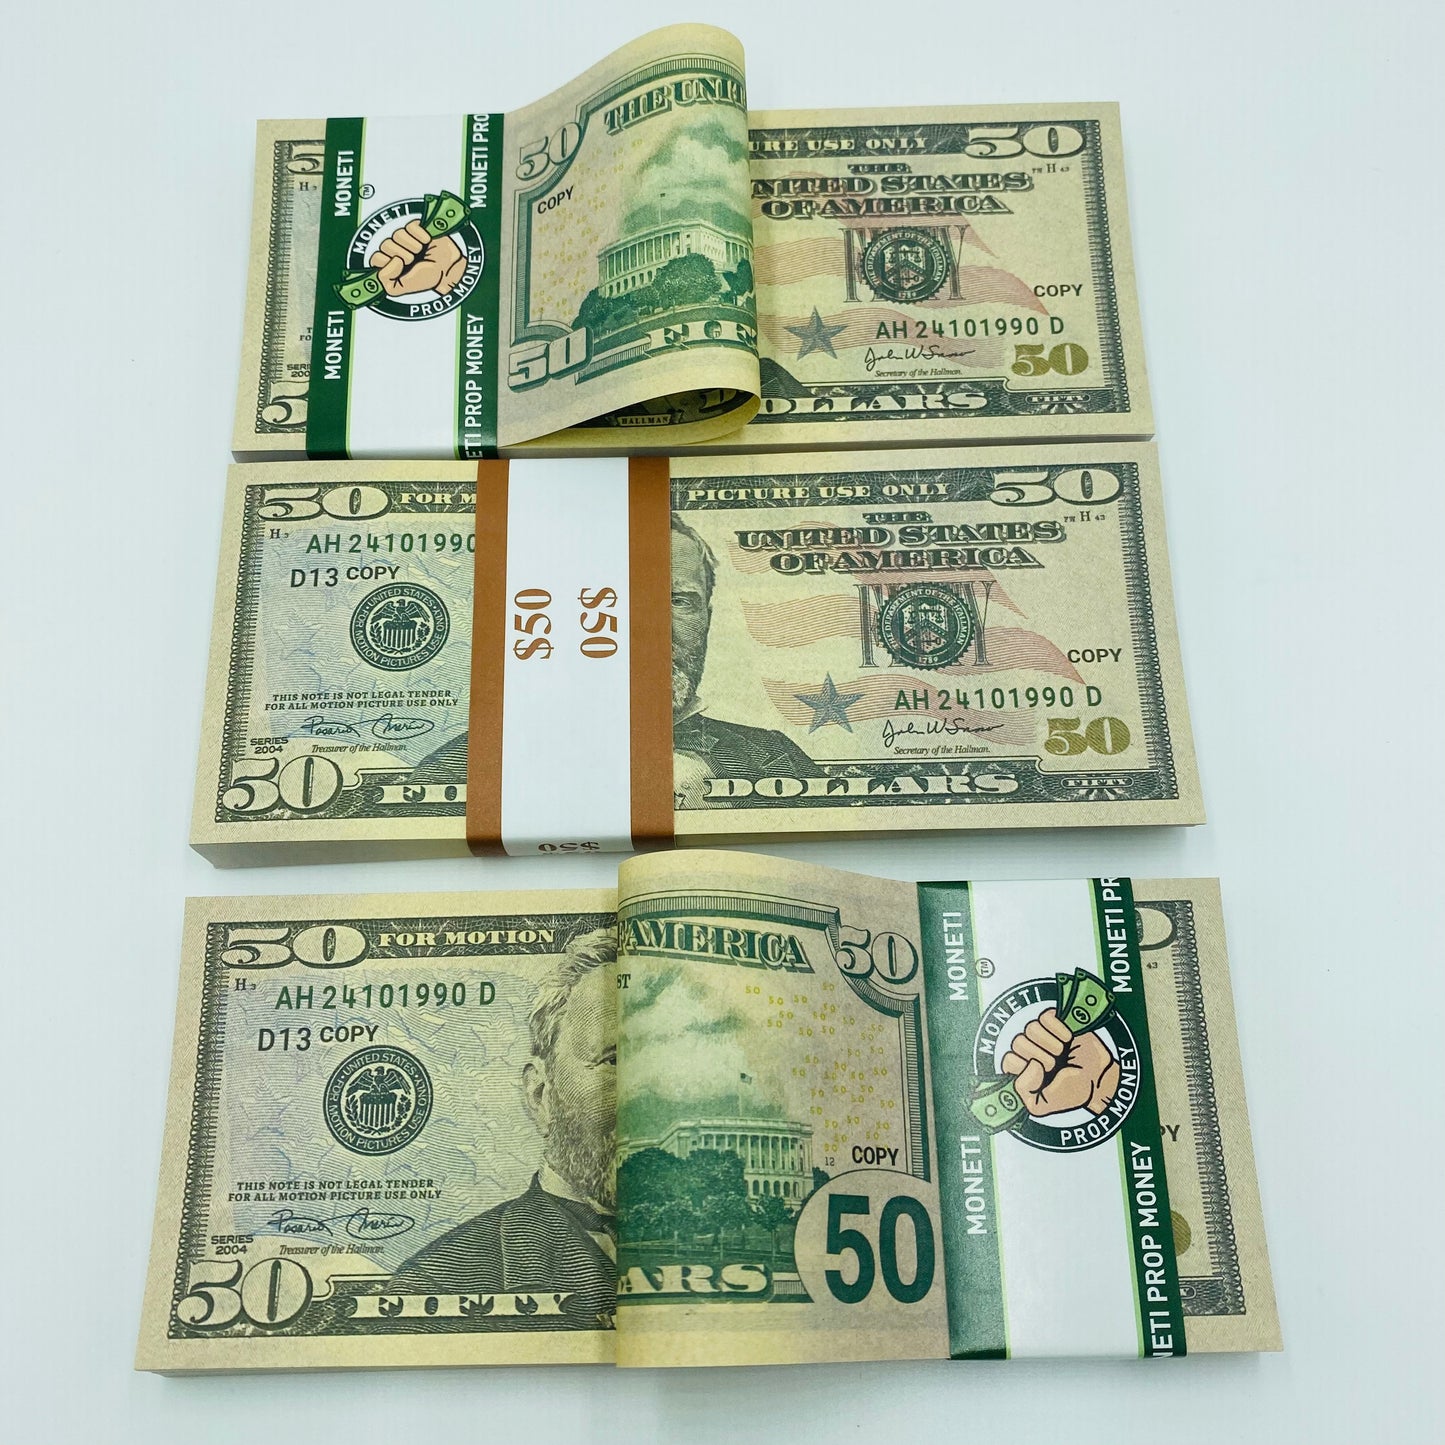 5.000 Dollar $50 Prop Money-Double Sided Full Printed Stack